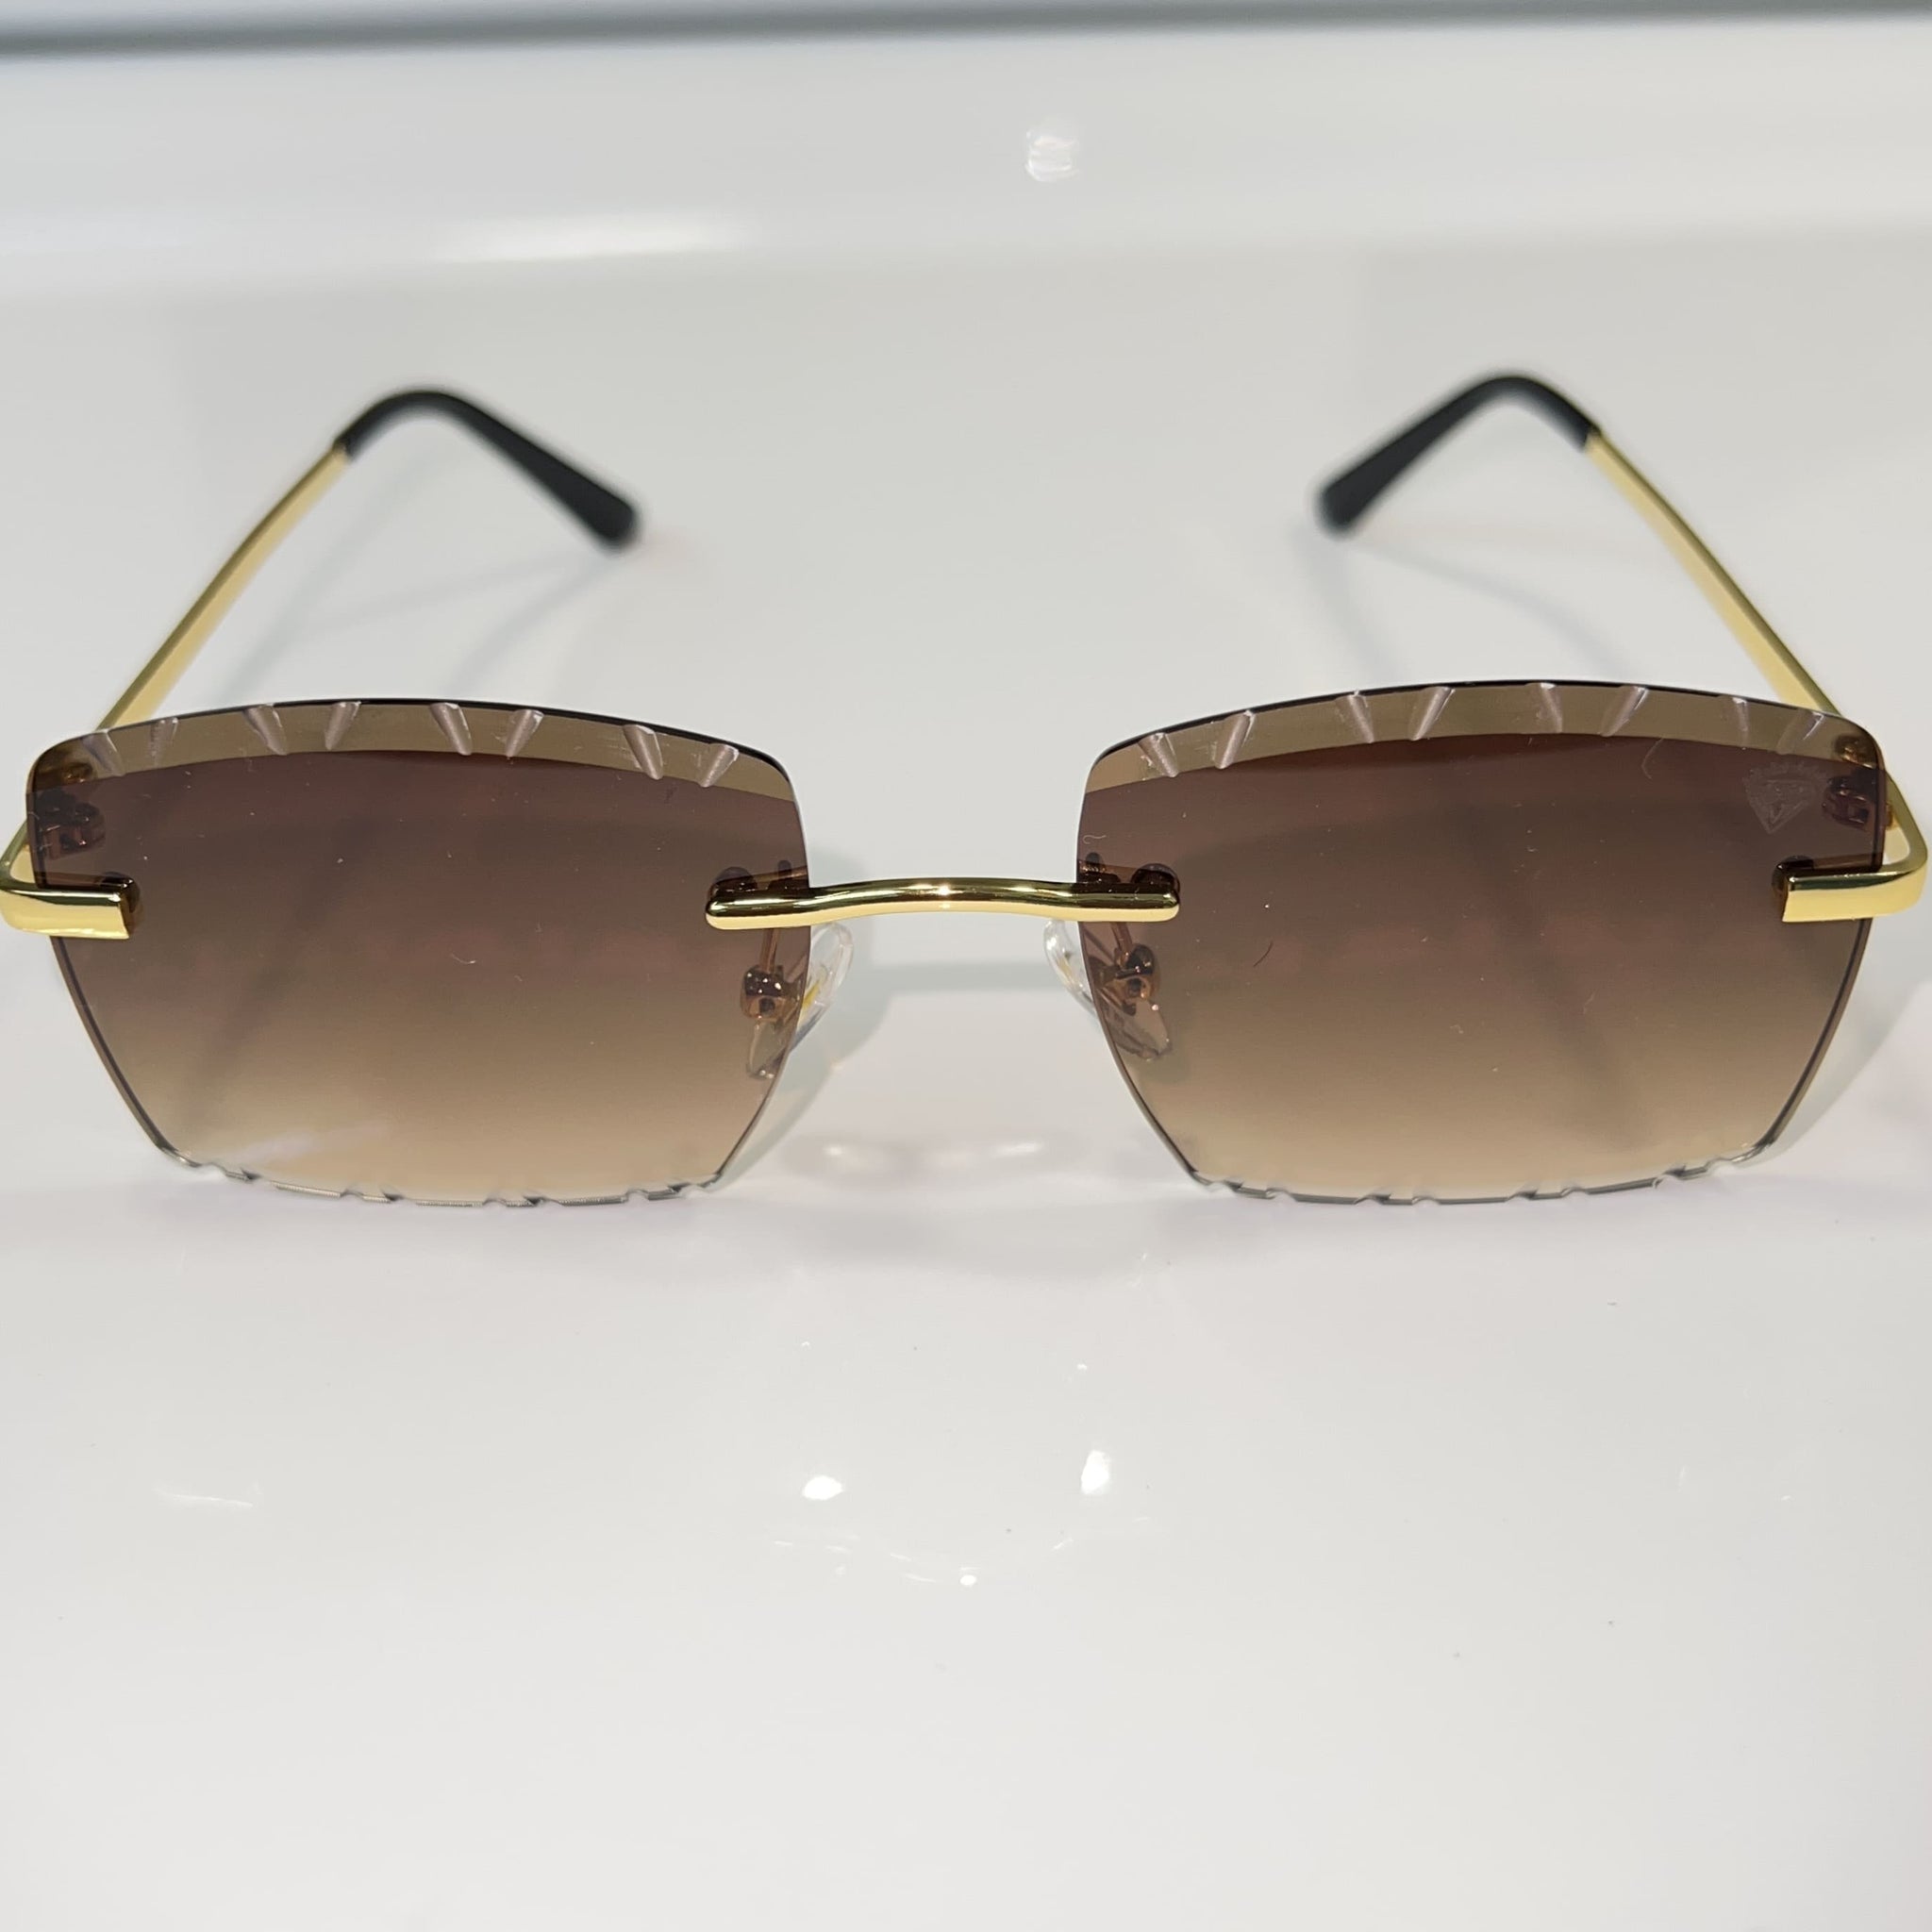 Dripcut Glasses - 14k gold plated - Brown Shade - Sehgal Glasses